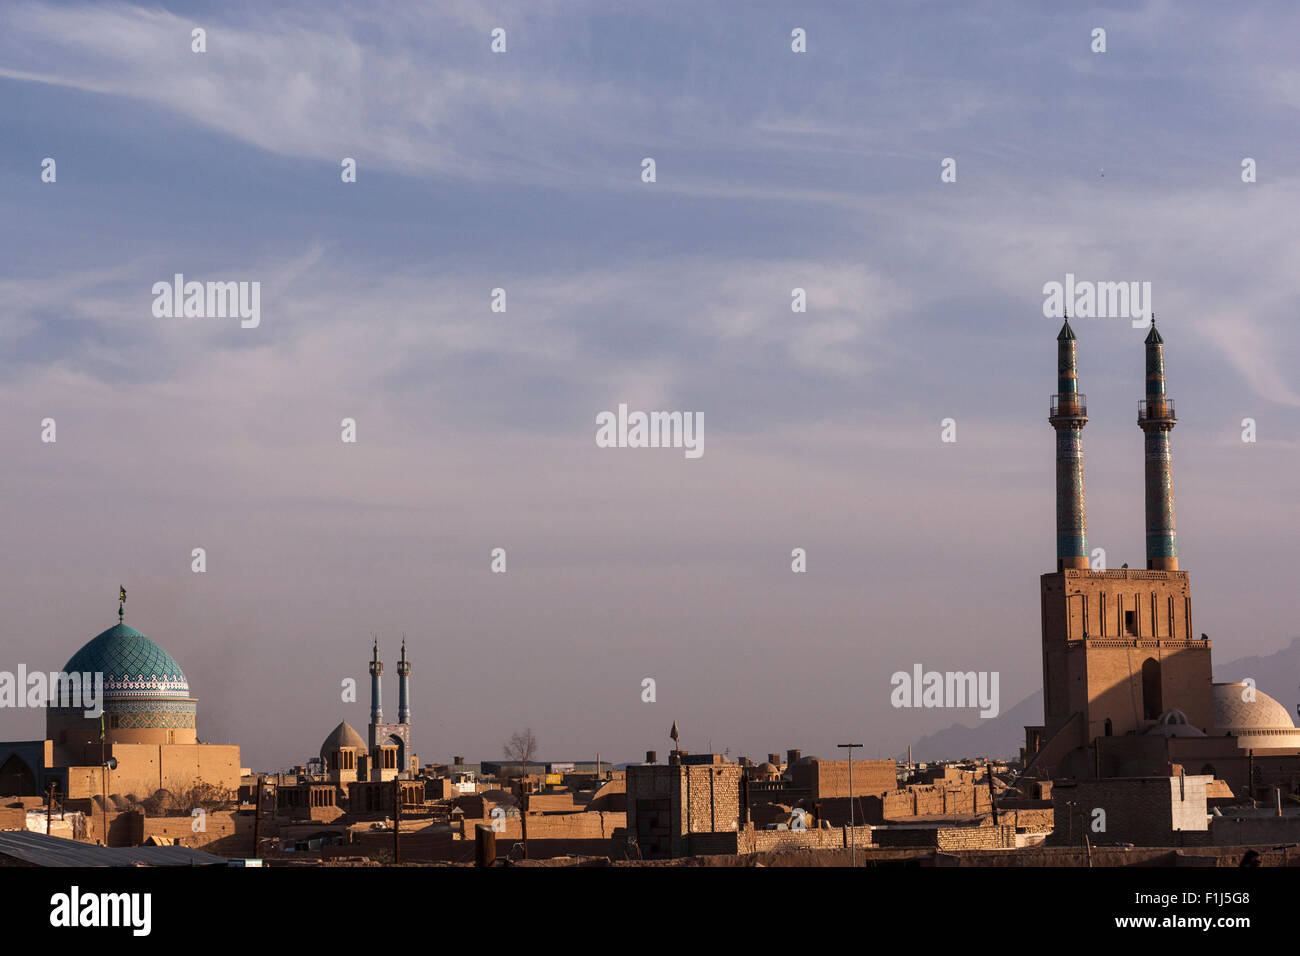 Yazd silhouette  with minarets and the Jame Mosque of Yazd, Iran Stock Photo